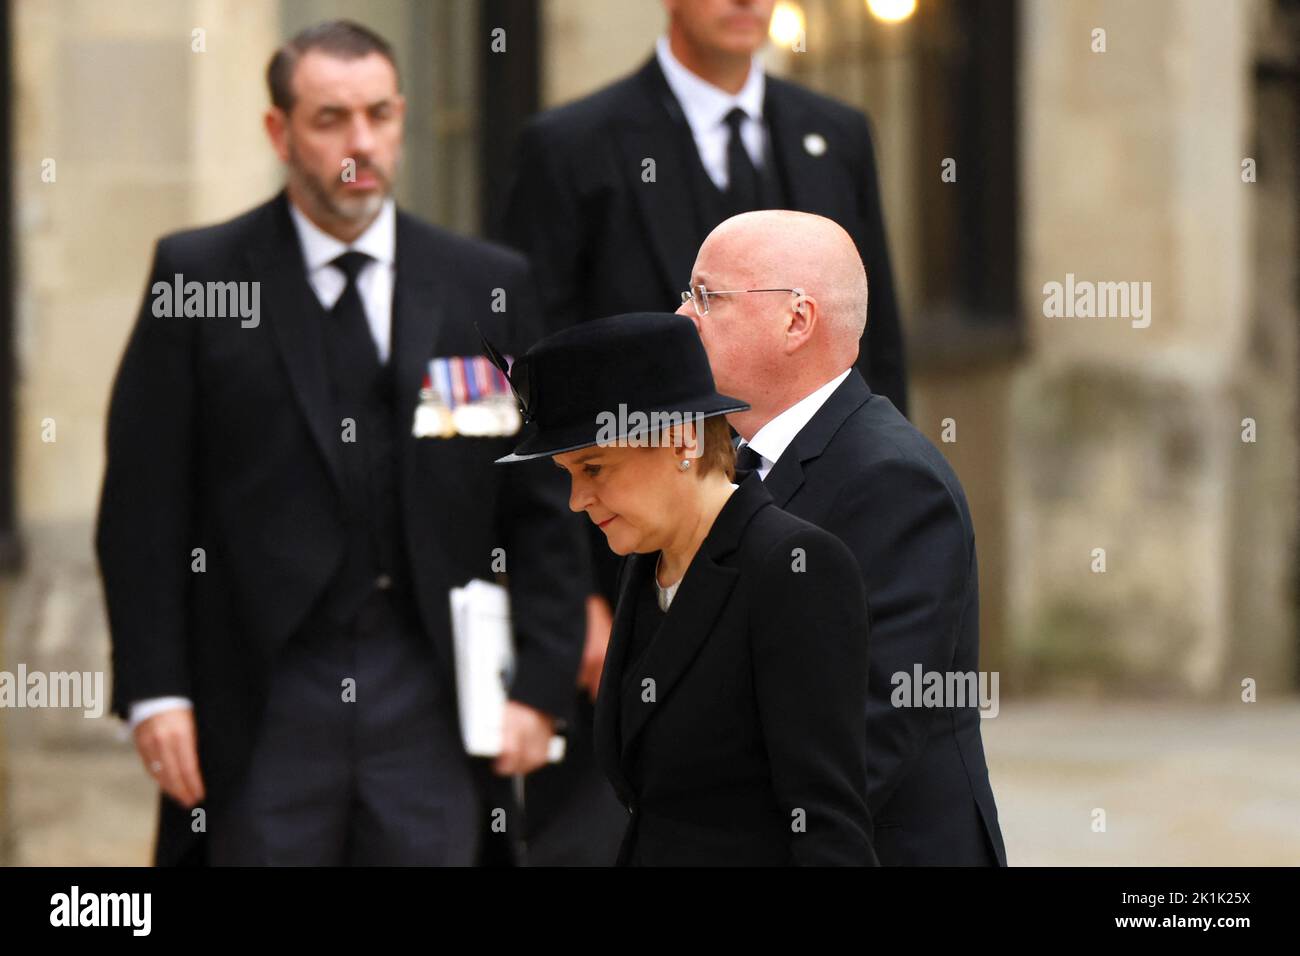 Scotland's First Minister Nicola Sturgeon arrives at Westminster Abbey on the day of the state funeral and burial of Britain's Queen Elizabeth, in London, Britain, September 19, 2022.  REUTERS/Kai Pfaffenbach Stock Photo